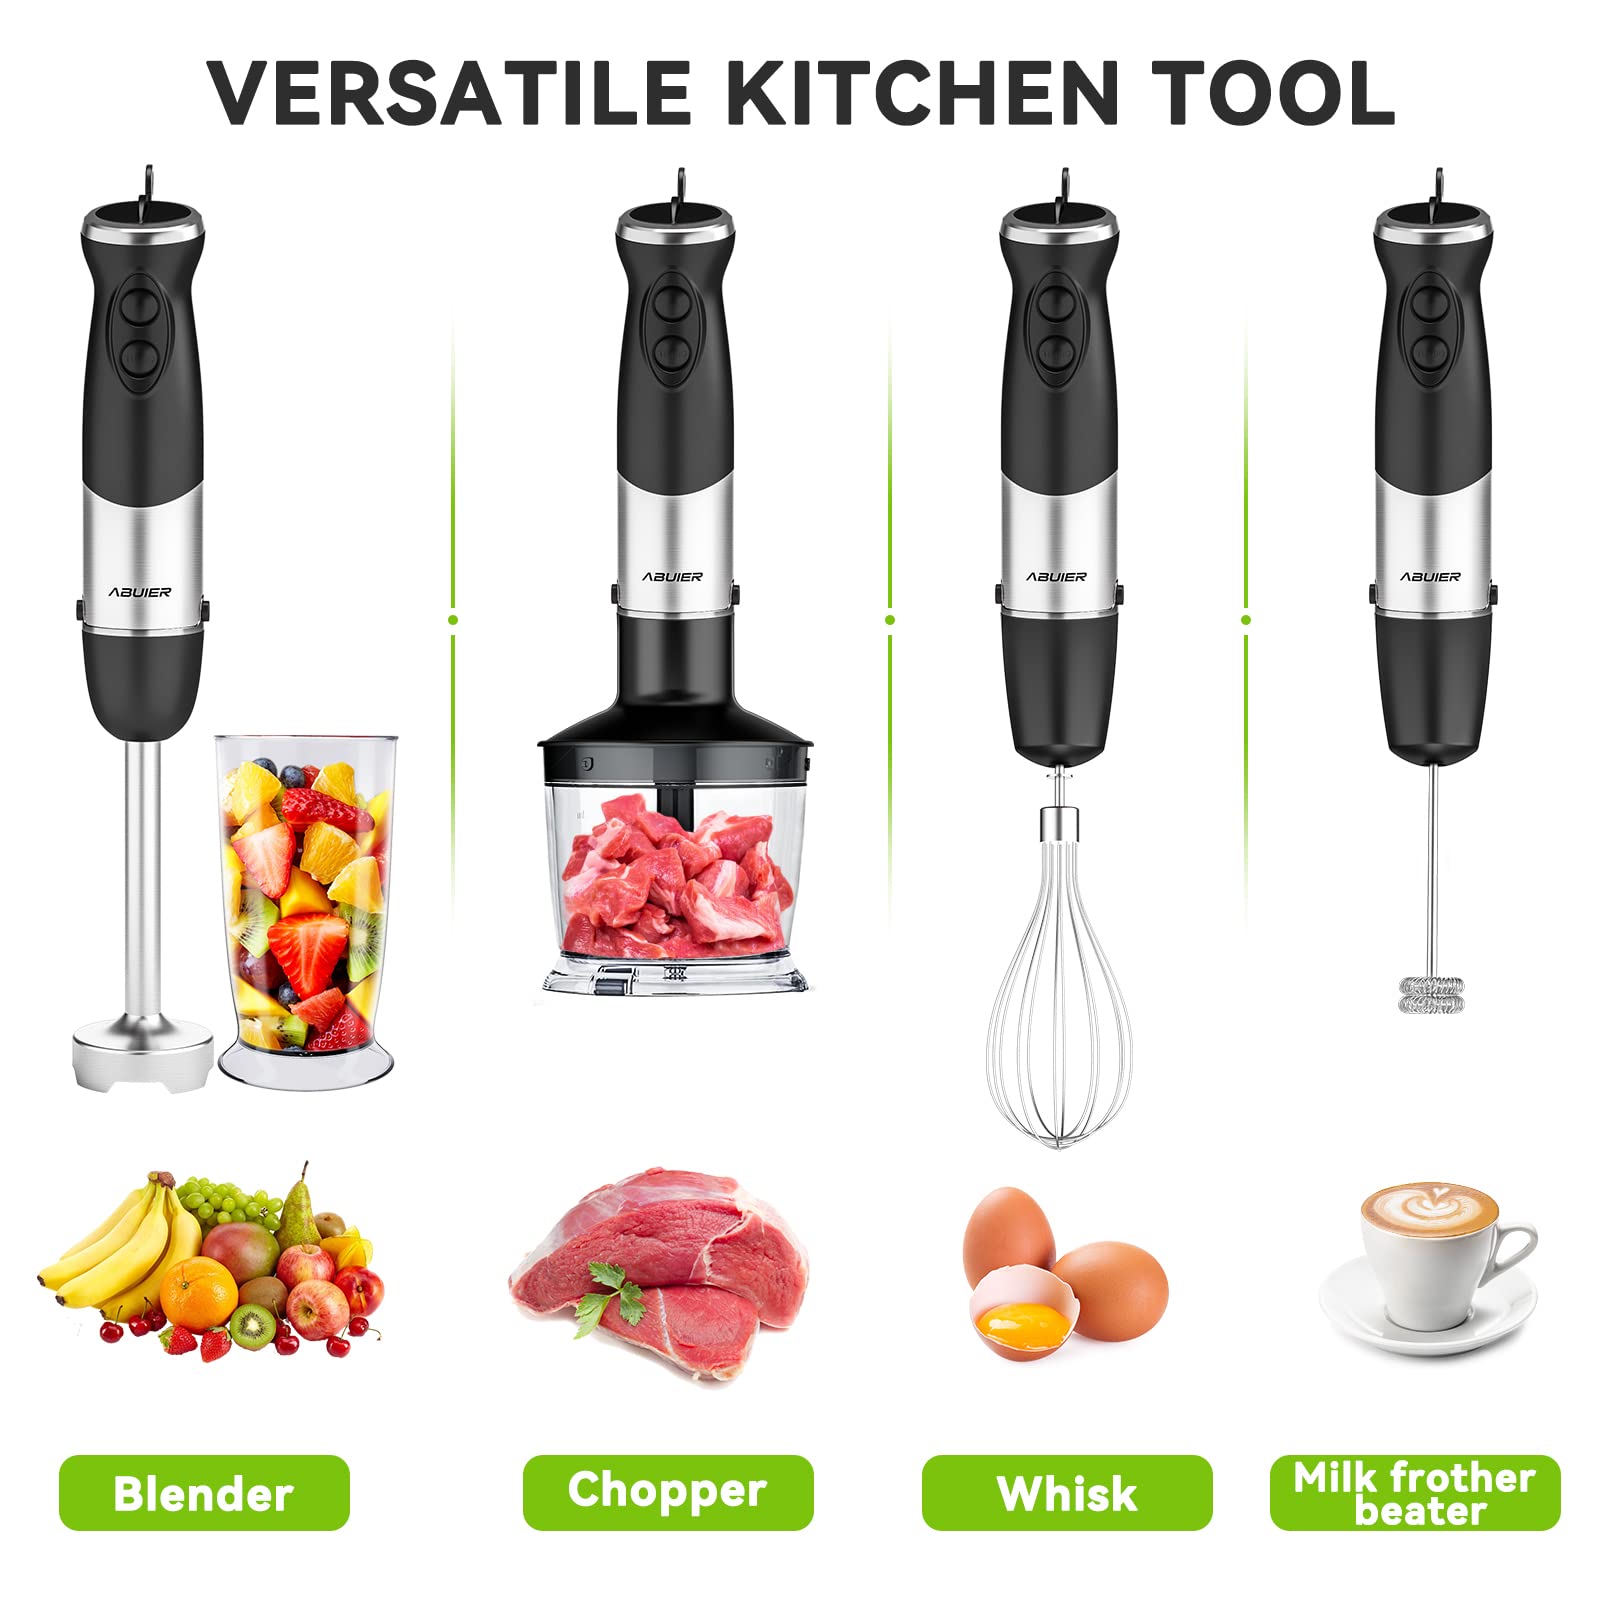 Immersion Blender vs. Food Processor: What's the Difference?